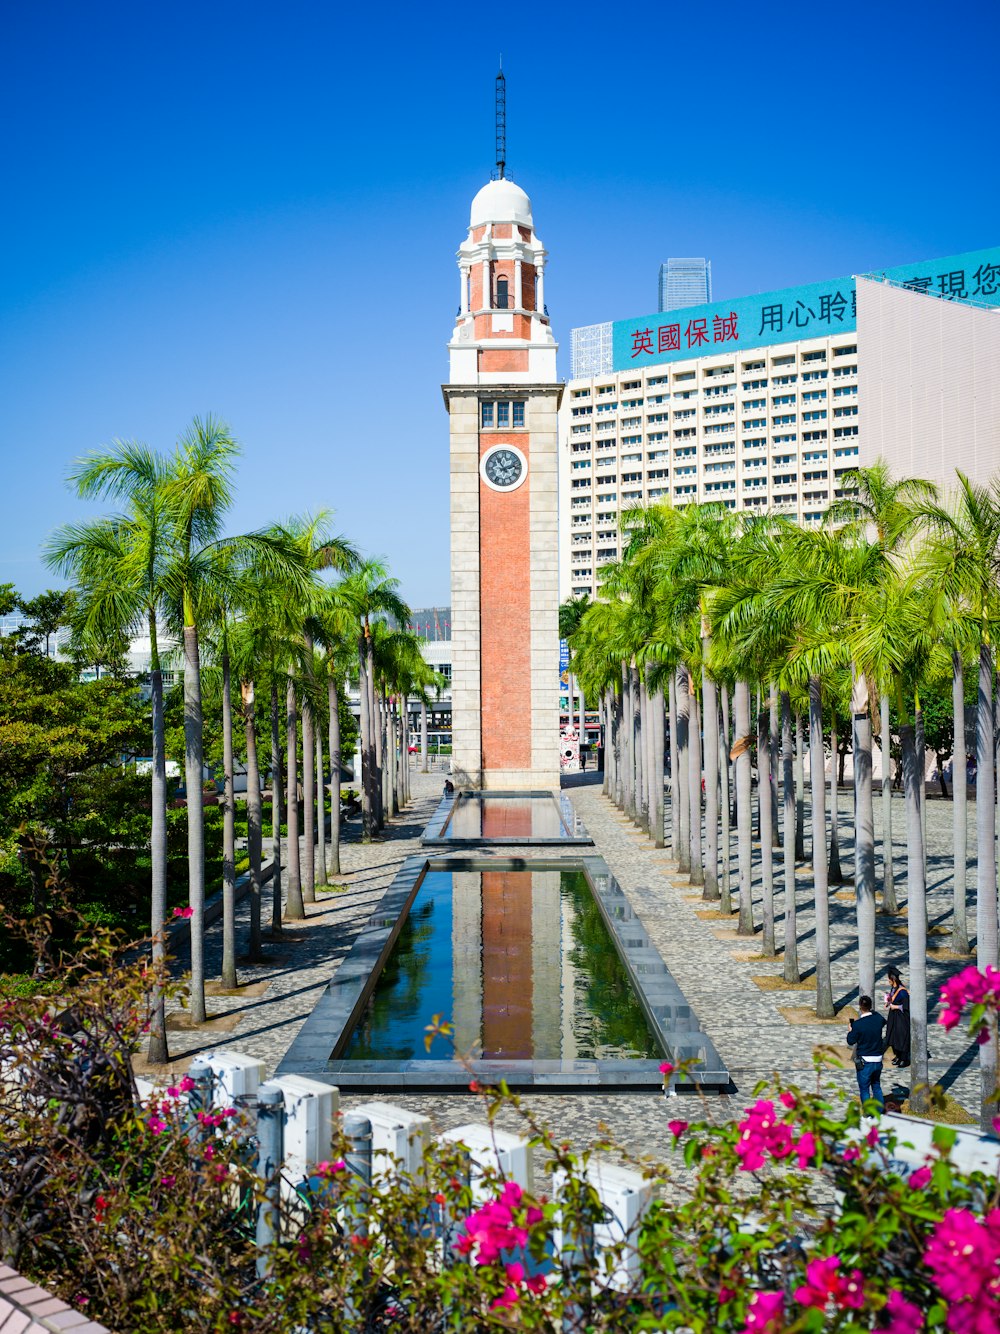 a tall clock tower sitting next to a pool of water